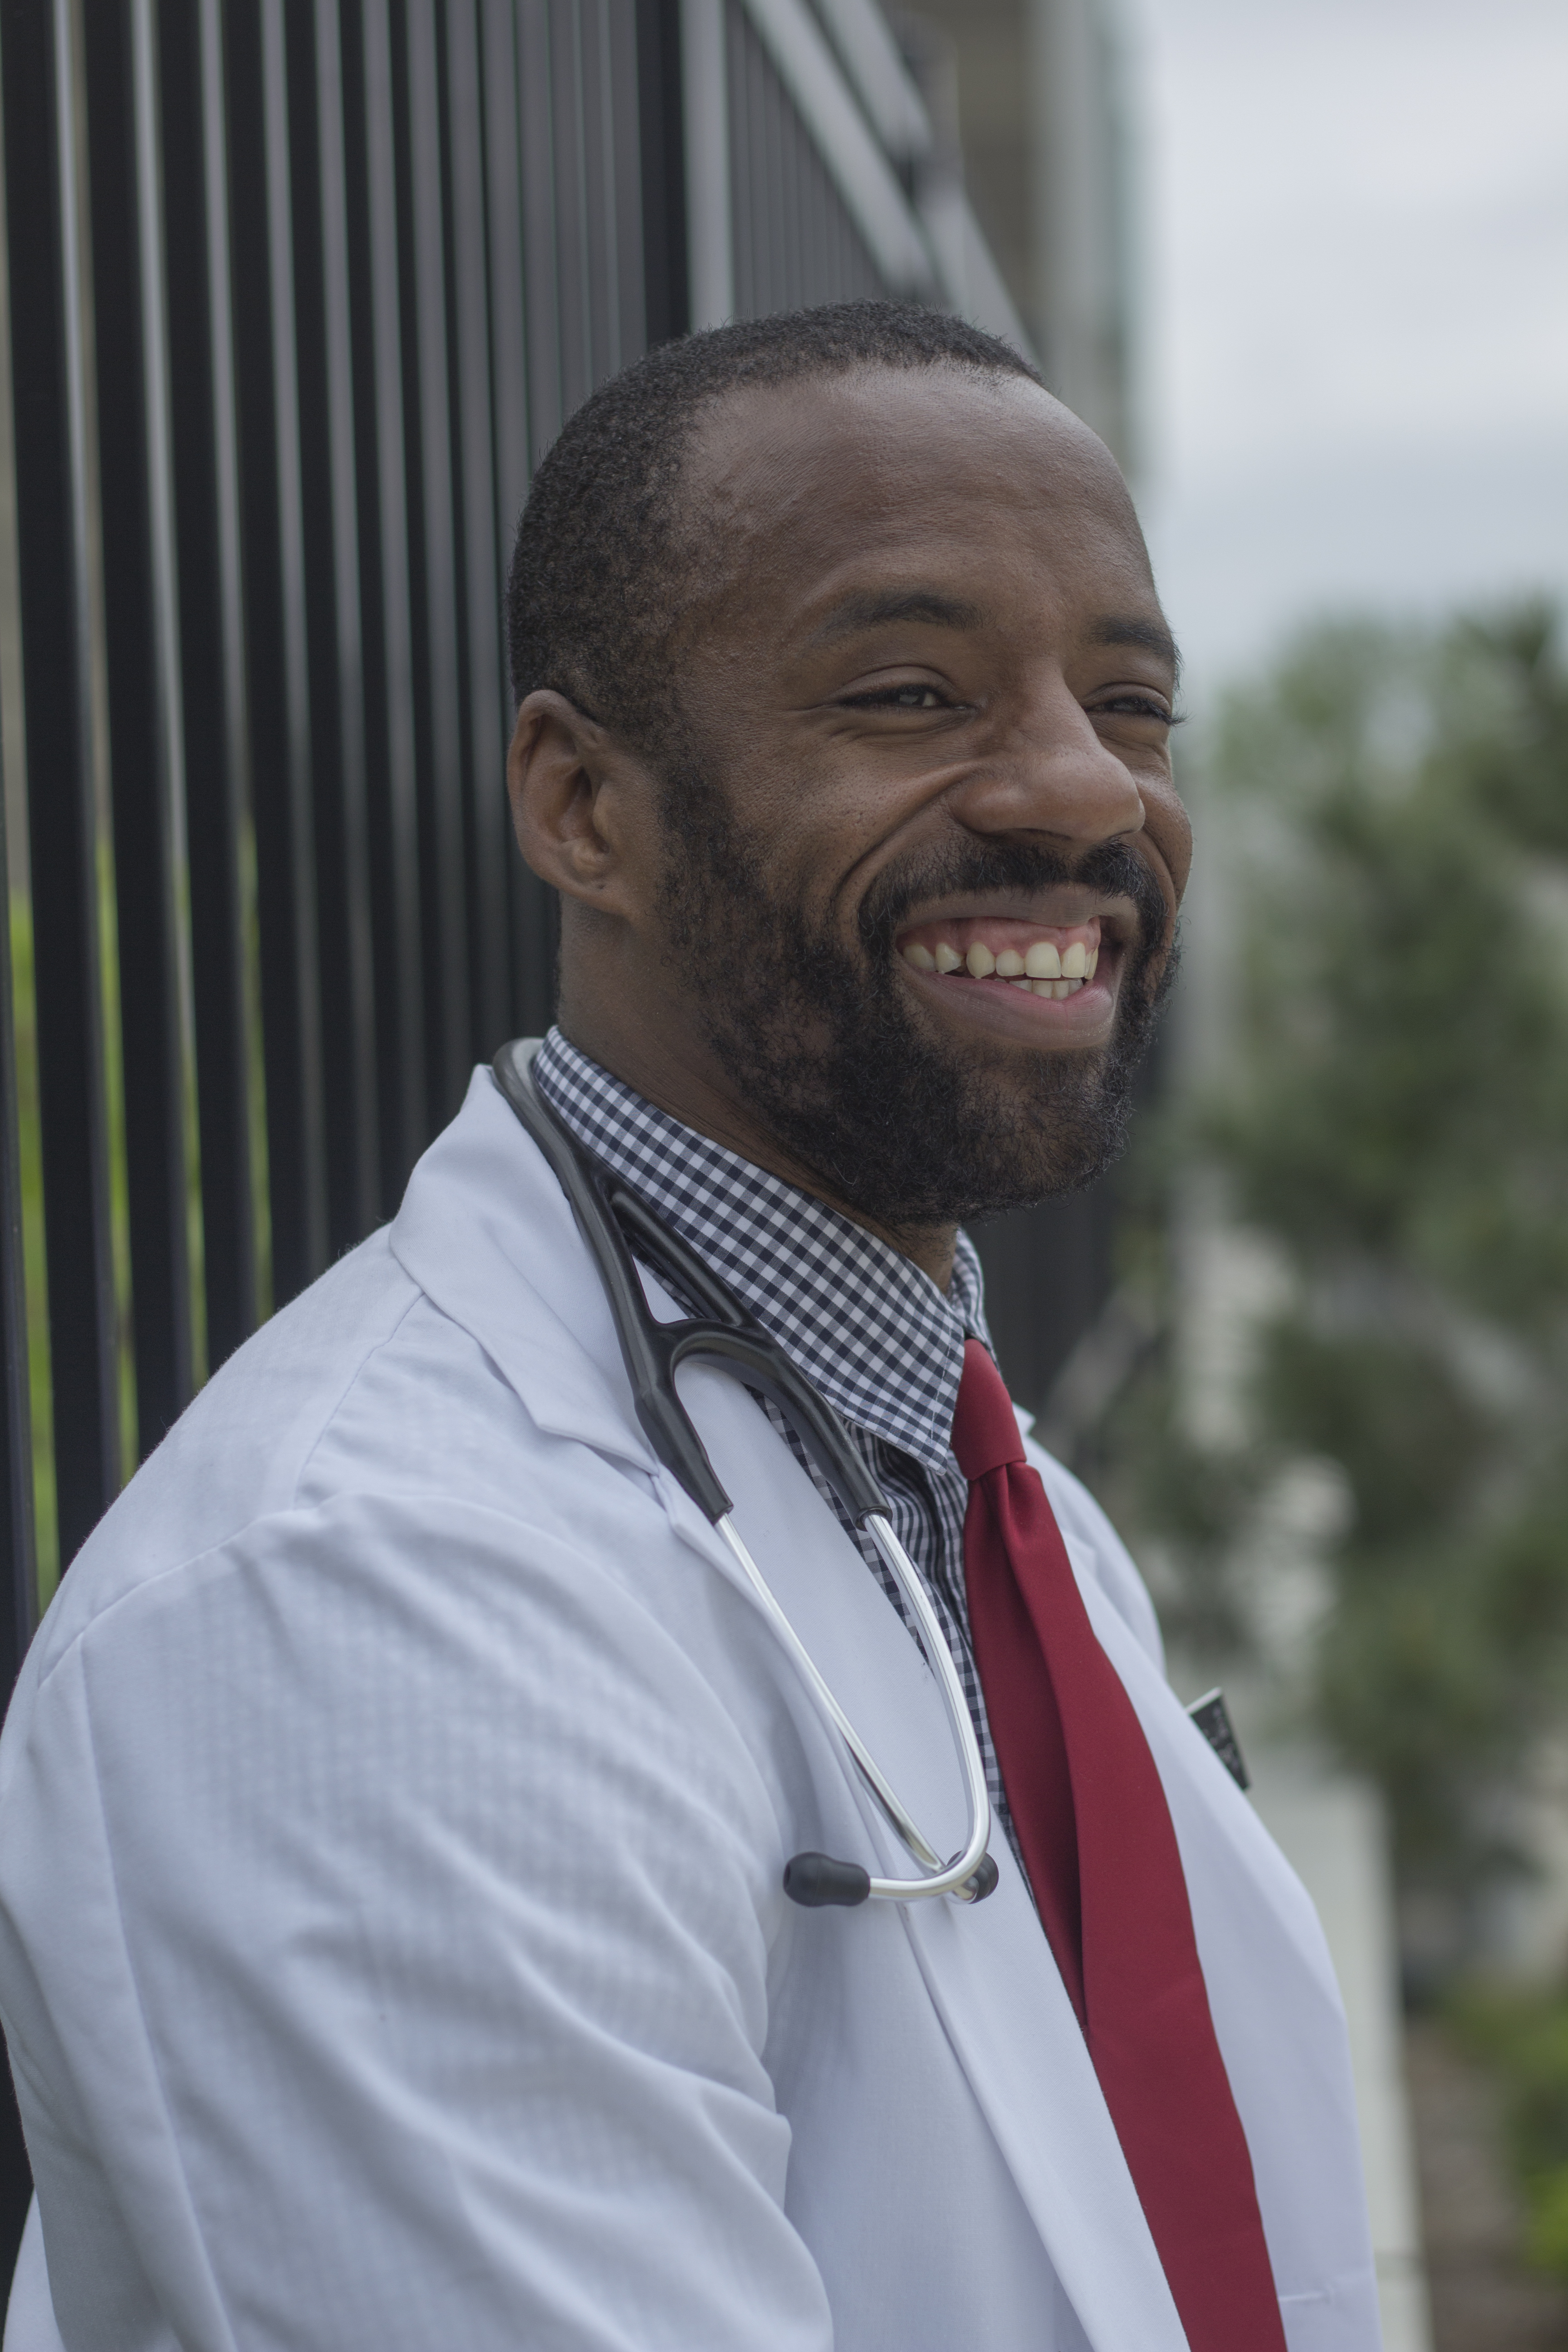 Darryl Olive is studying at the UMKC Medicine Schooll